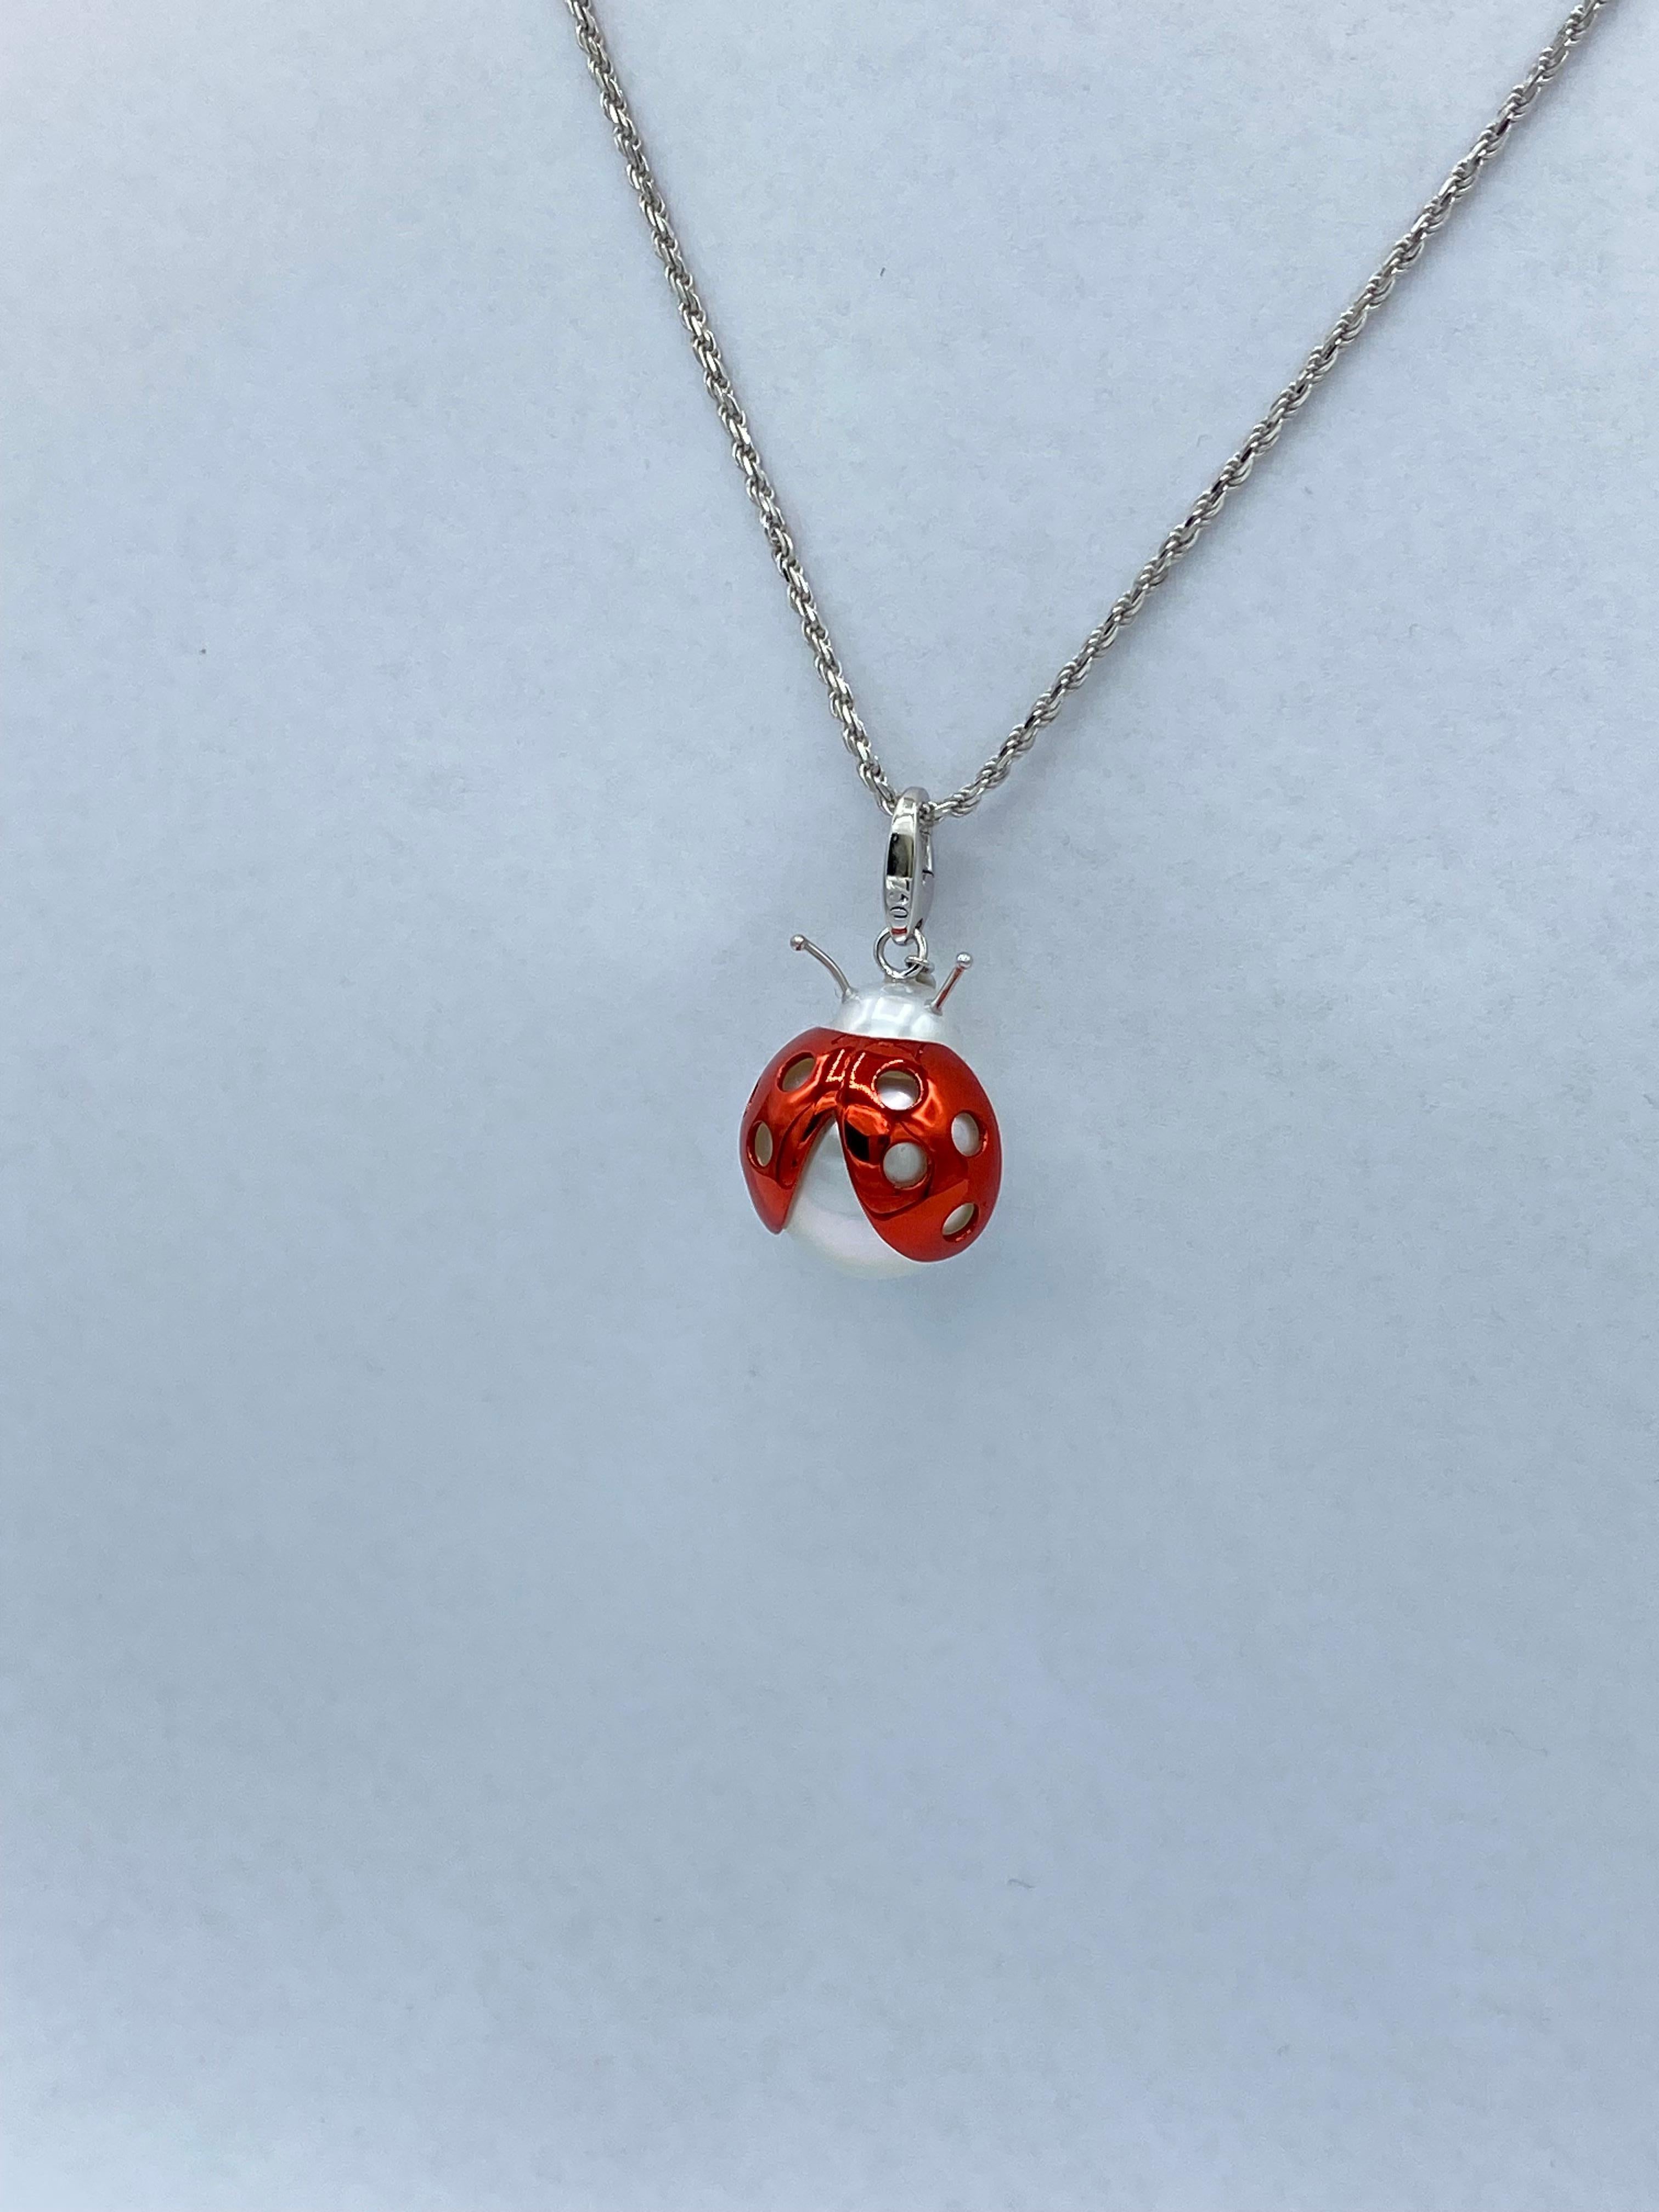 Uncut Ladybird/Bug Australian Pearl Red White 18 Karat Gold Pendant/Necklace or Charm For Sale